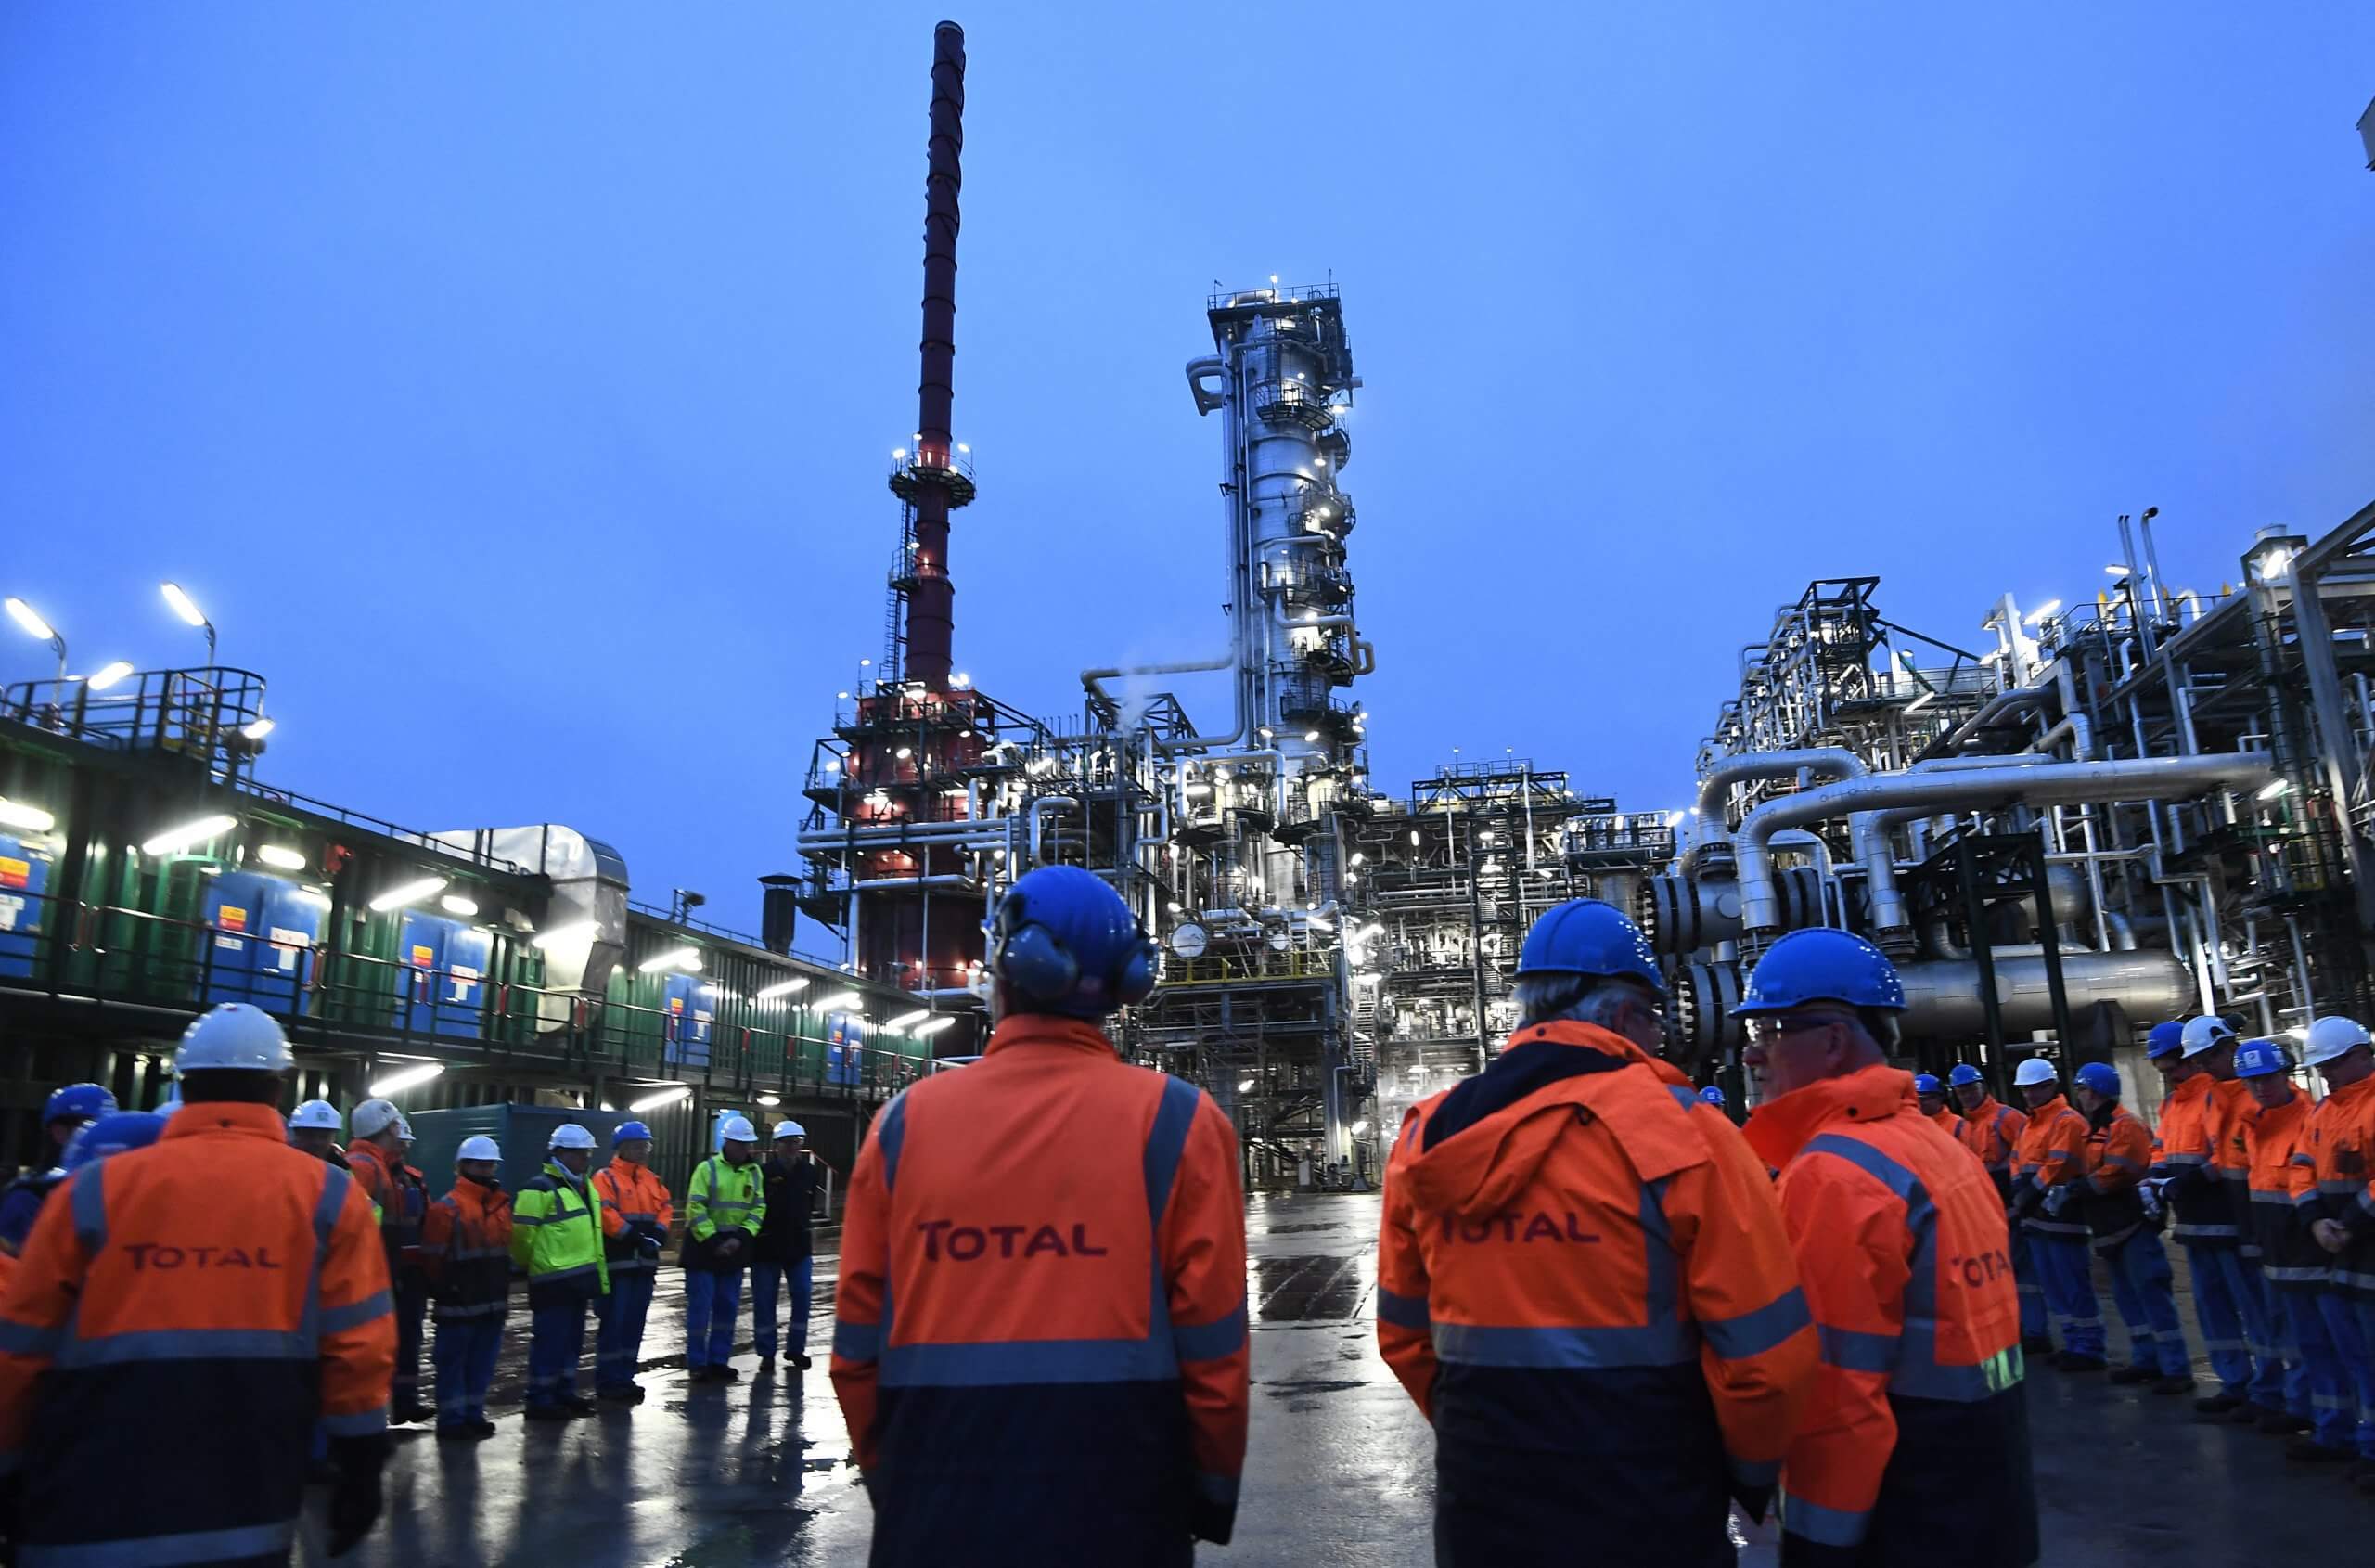 Major oil terminals in some of Western Europe's biggest ports fell victim to a cyberattack at a time energy prices are already soaring